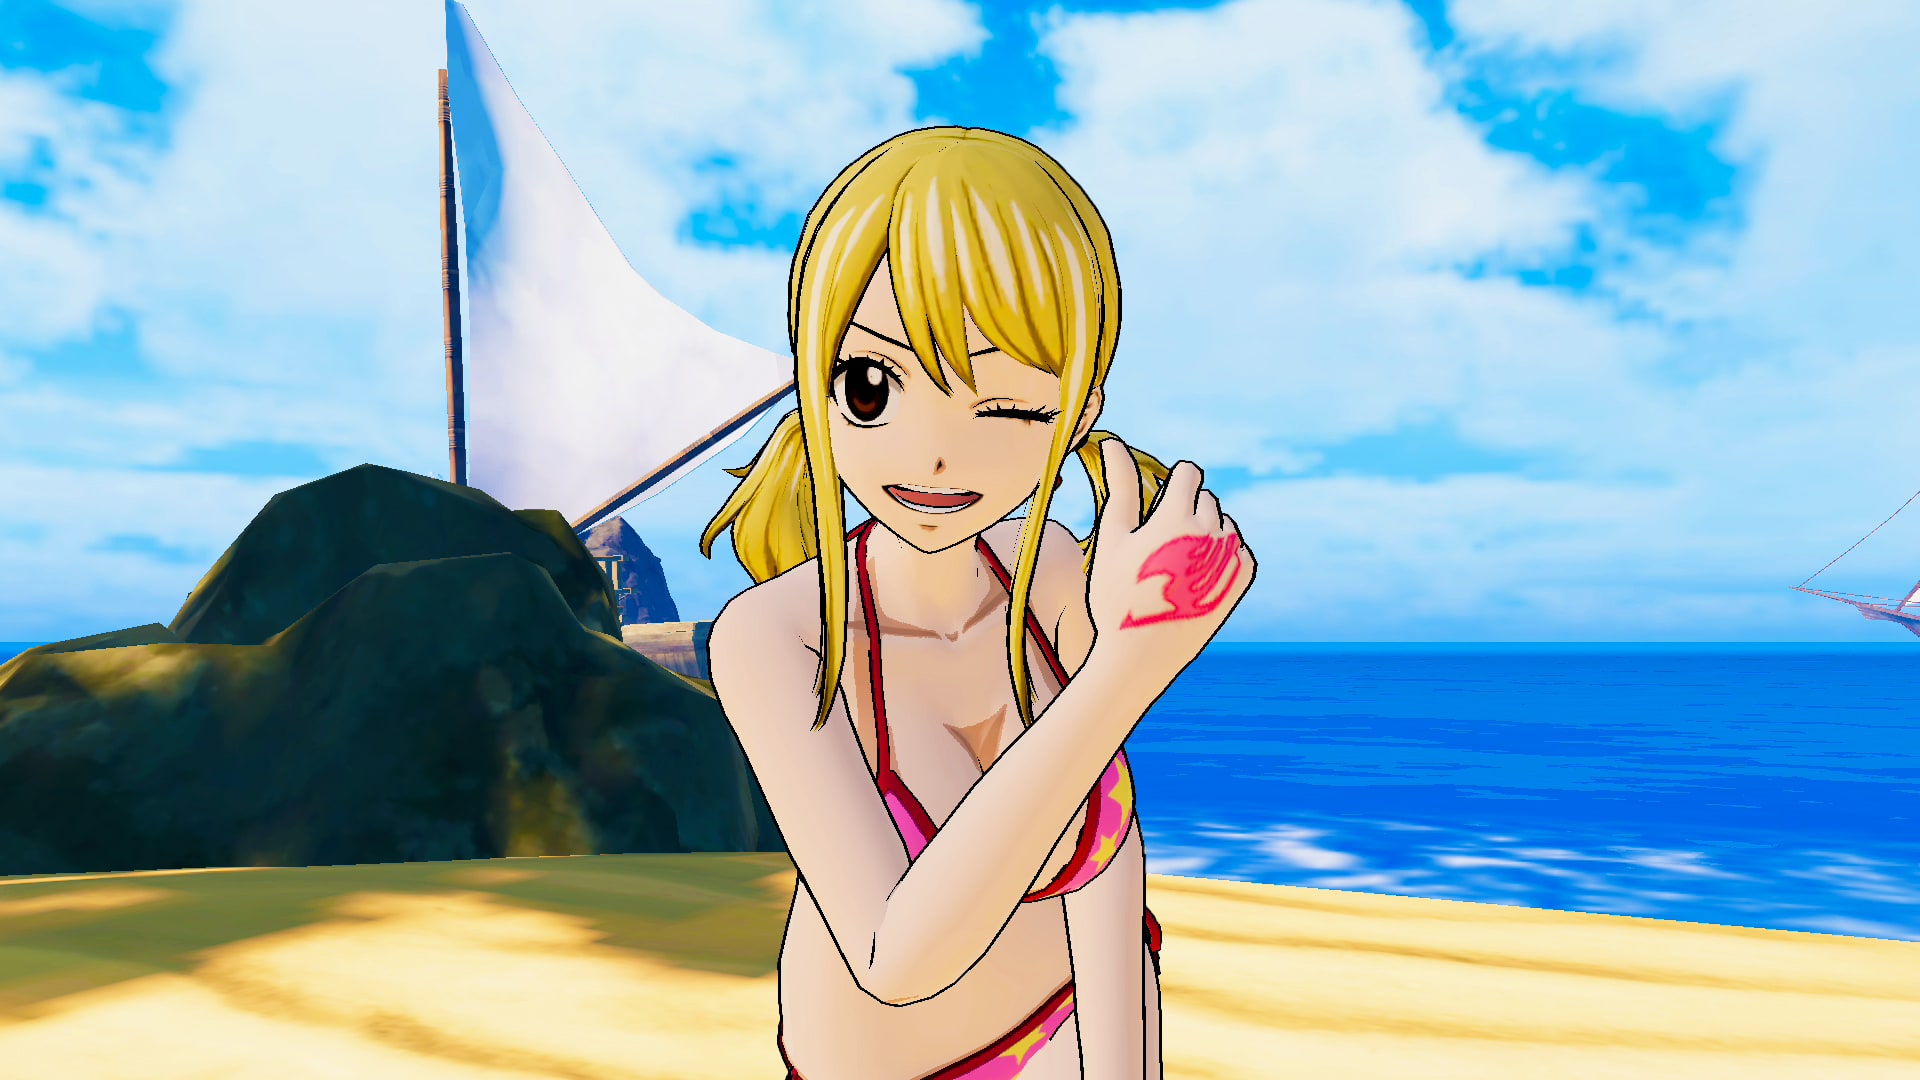 Lucy's Costume "Special Swimsuit"